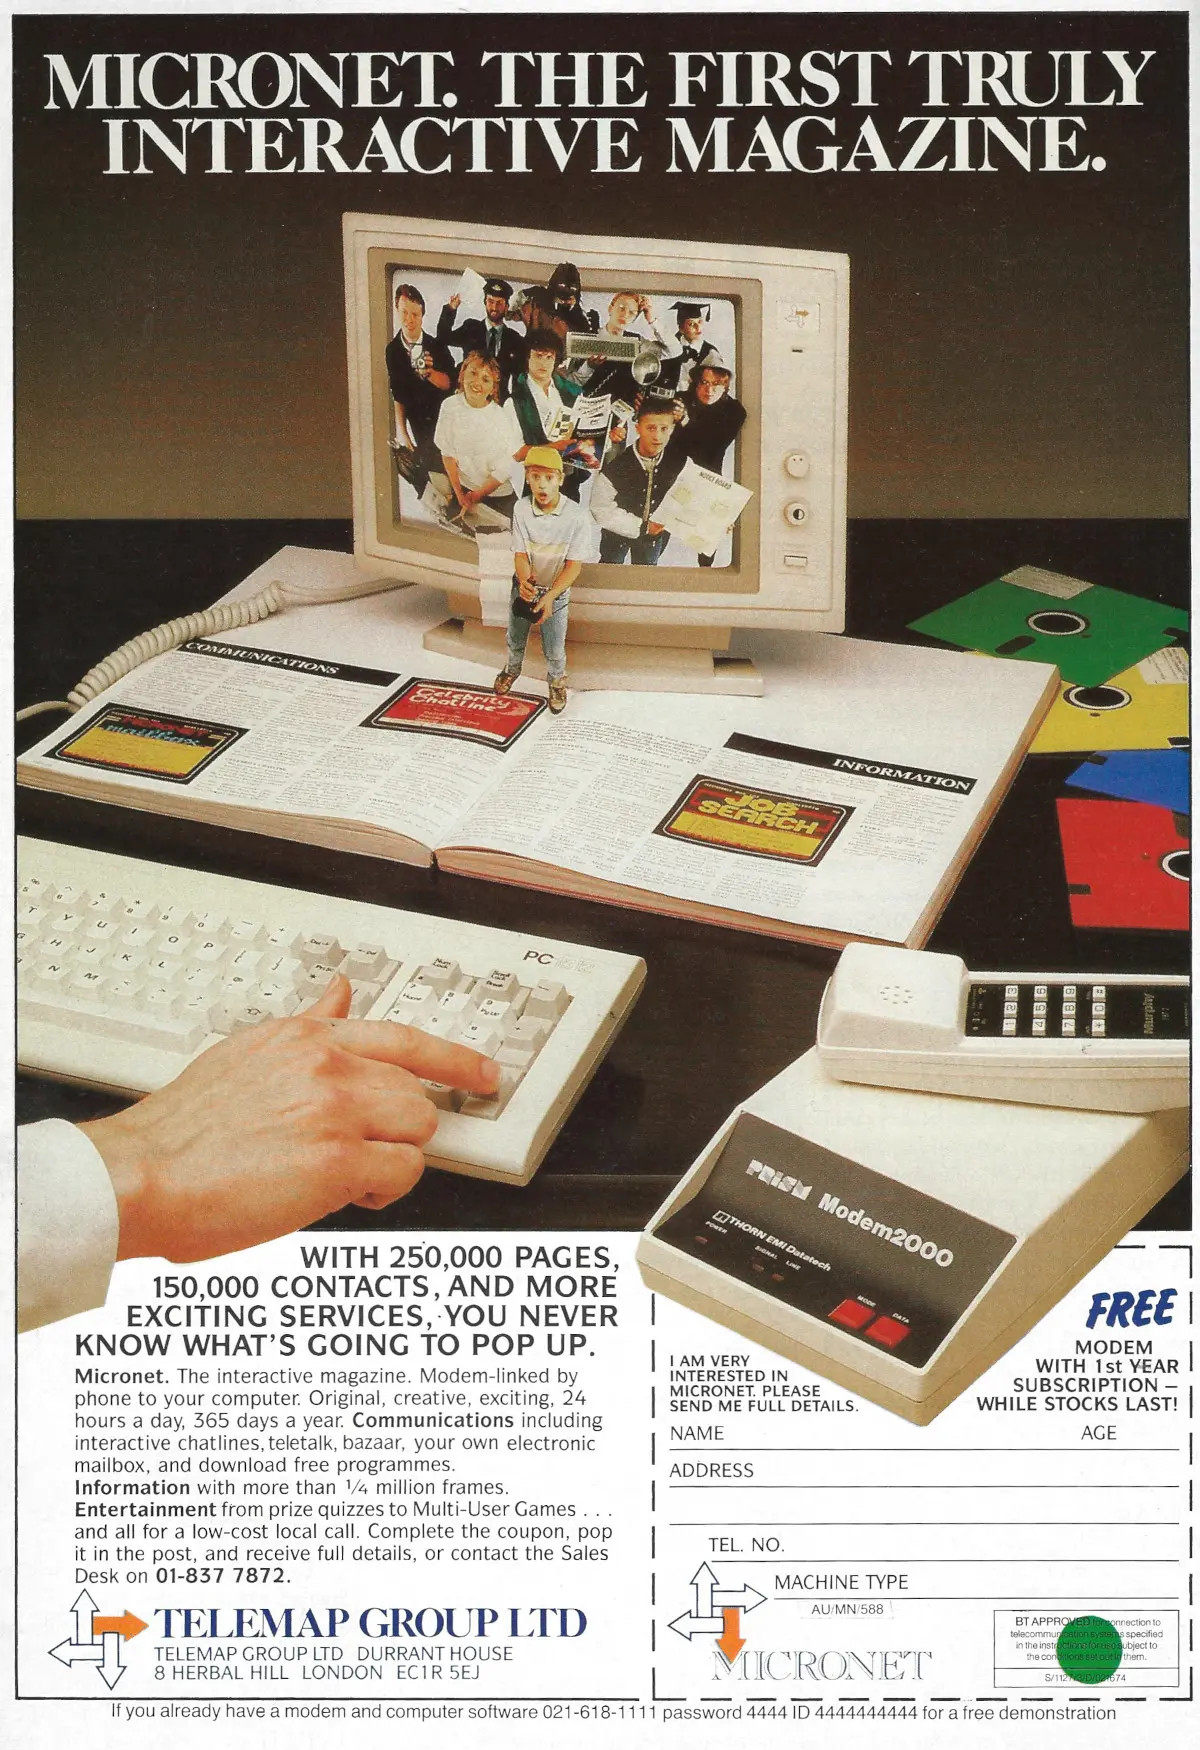 An advert for Telemap Micronet - the first truly inter<span class='hilite'>act</span>ive magazine - and featuring a Prism Modem2000, now built by Thorn EMI Datatech following the collapse of Prism itself. From Acorn User, May 1988